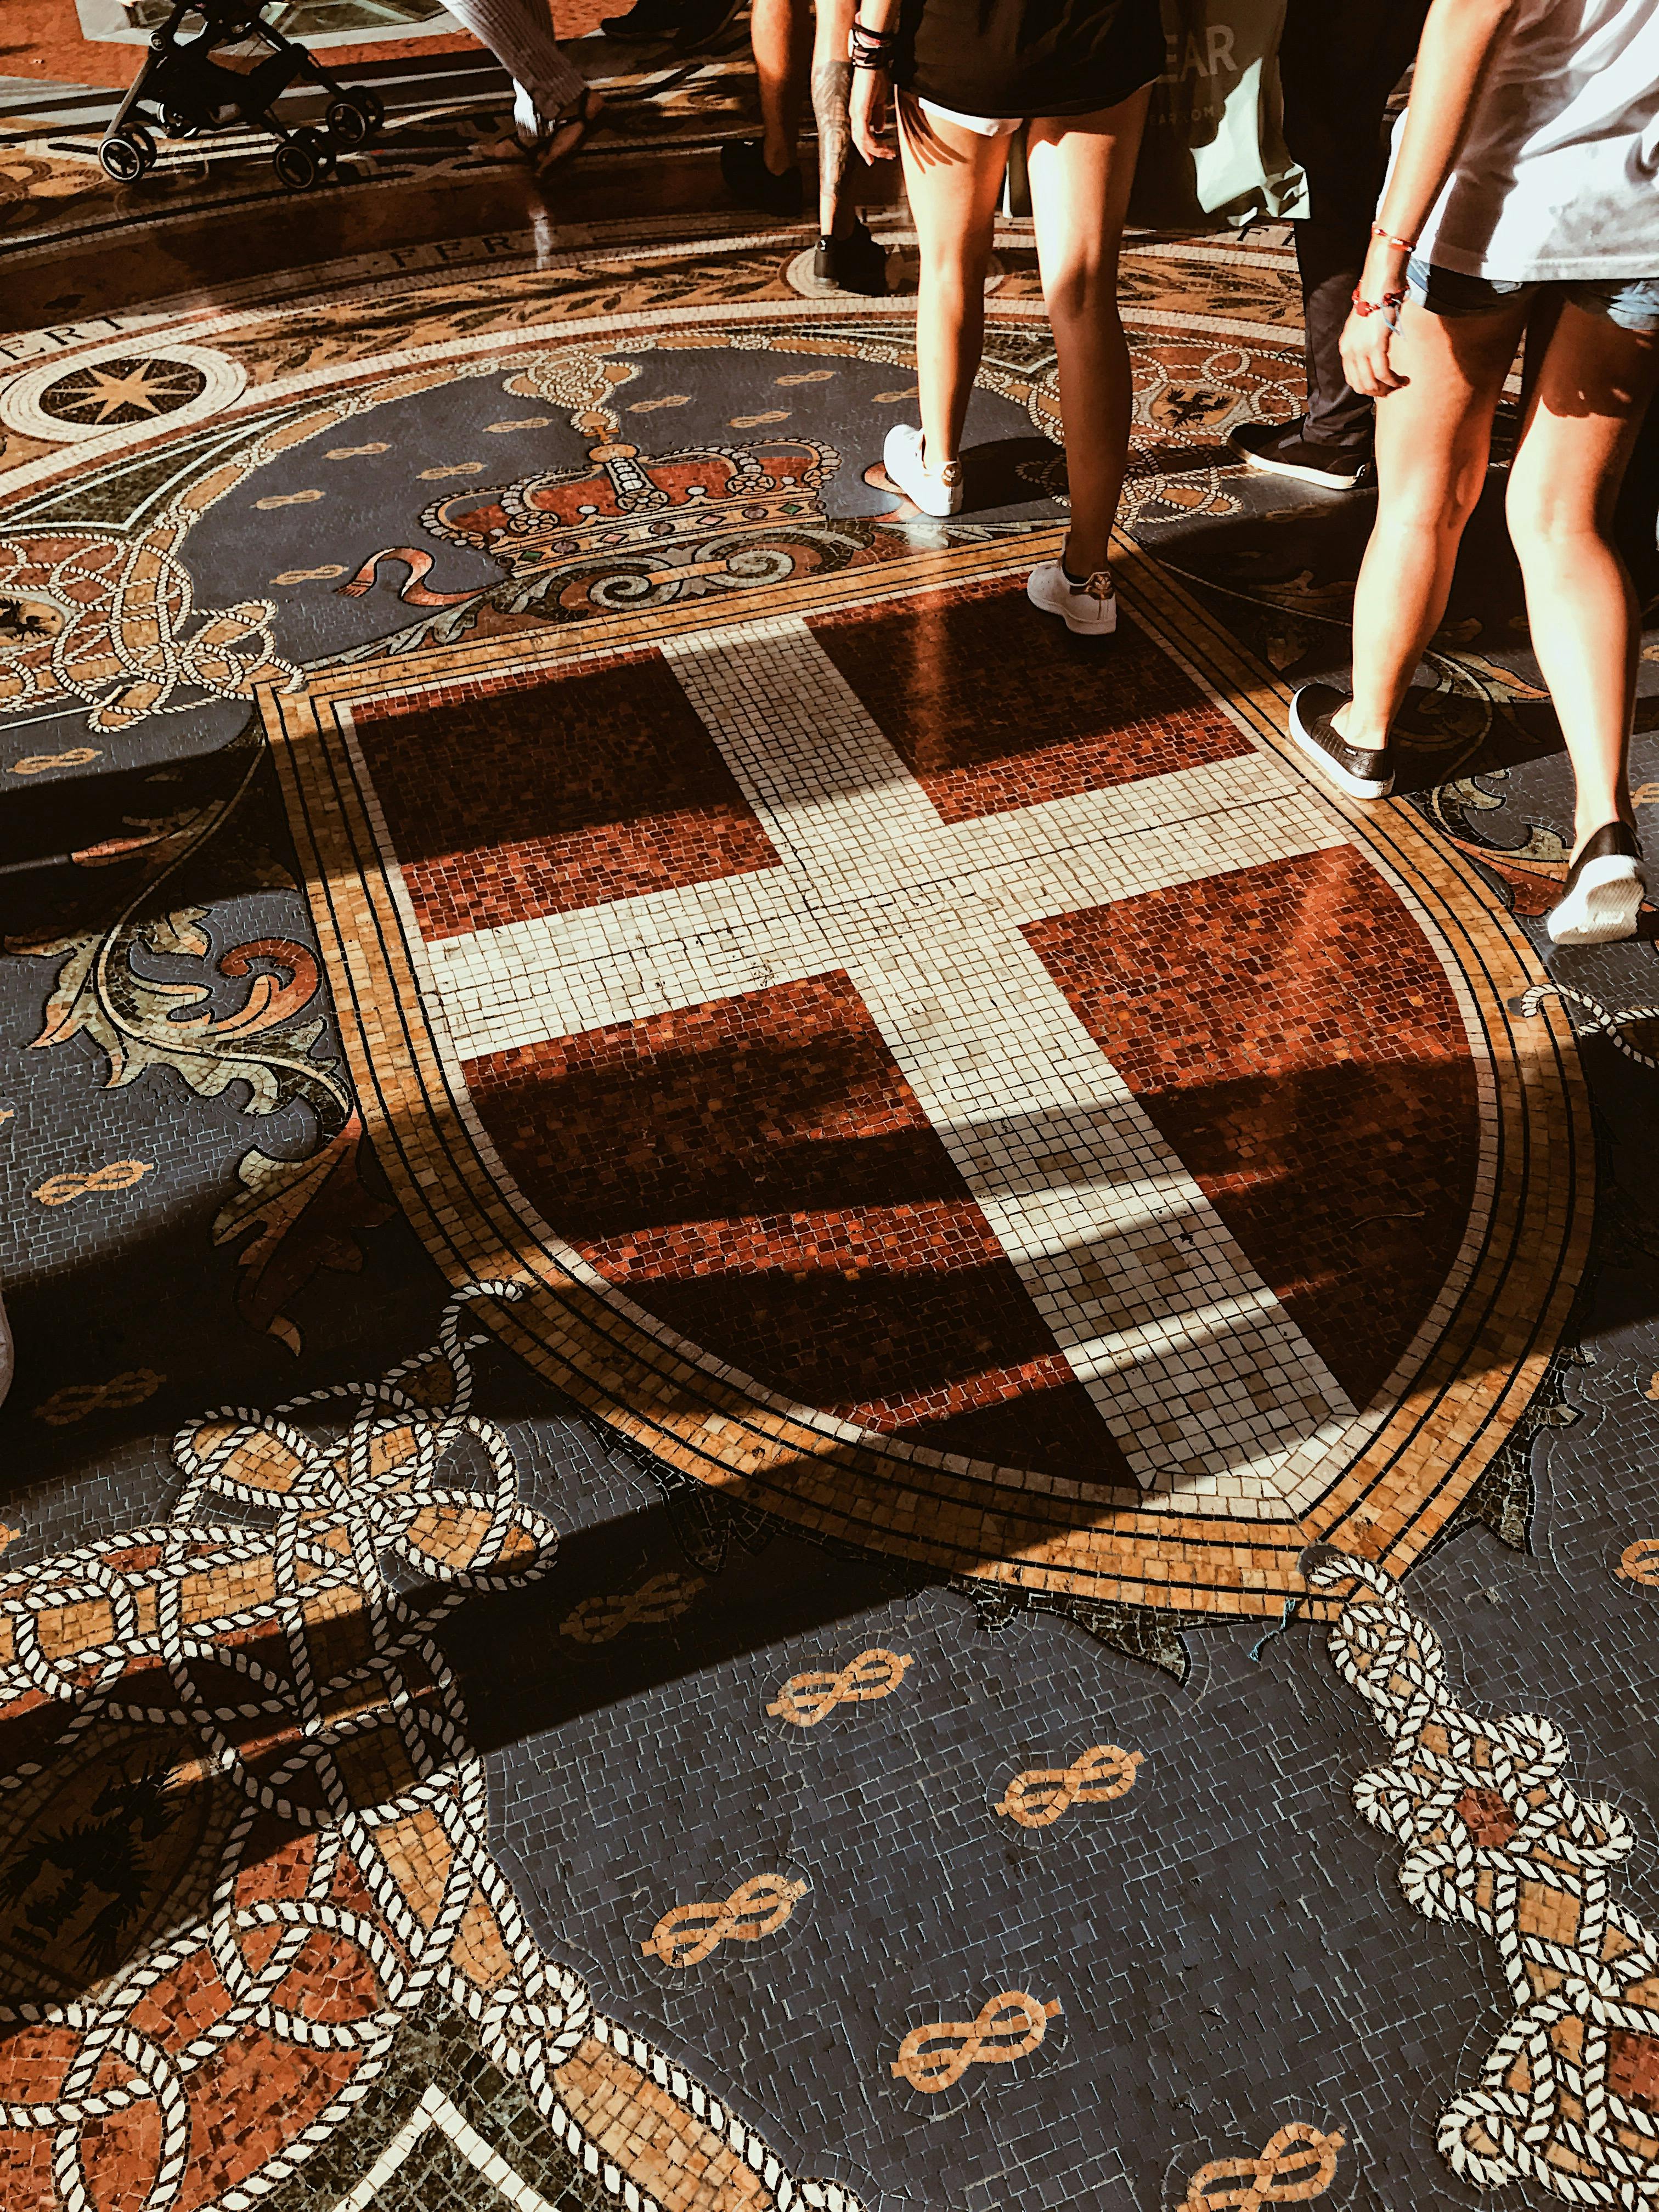 mosaic floor with coat of arms of milan